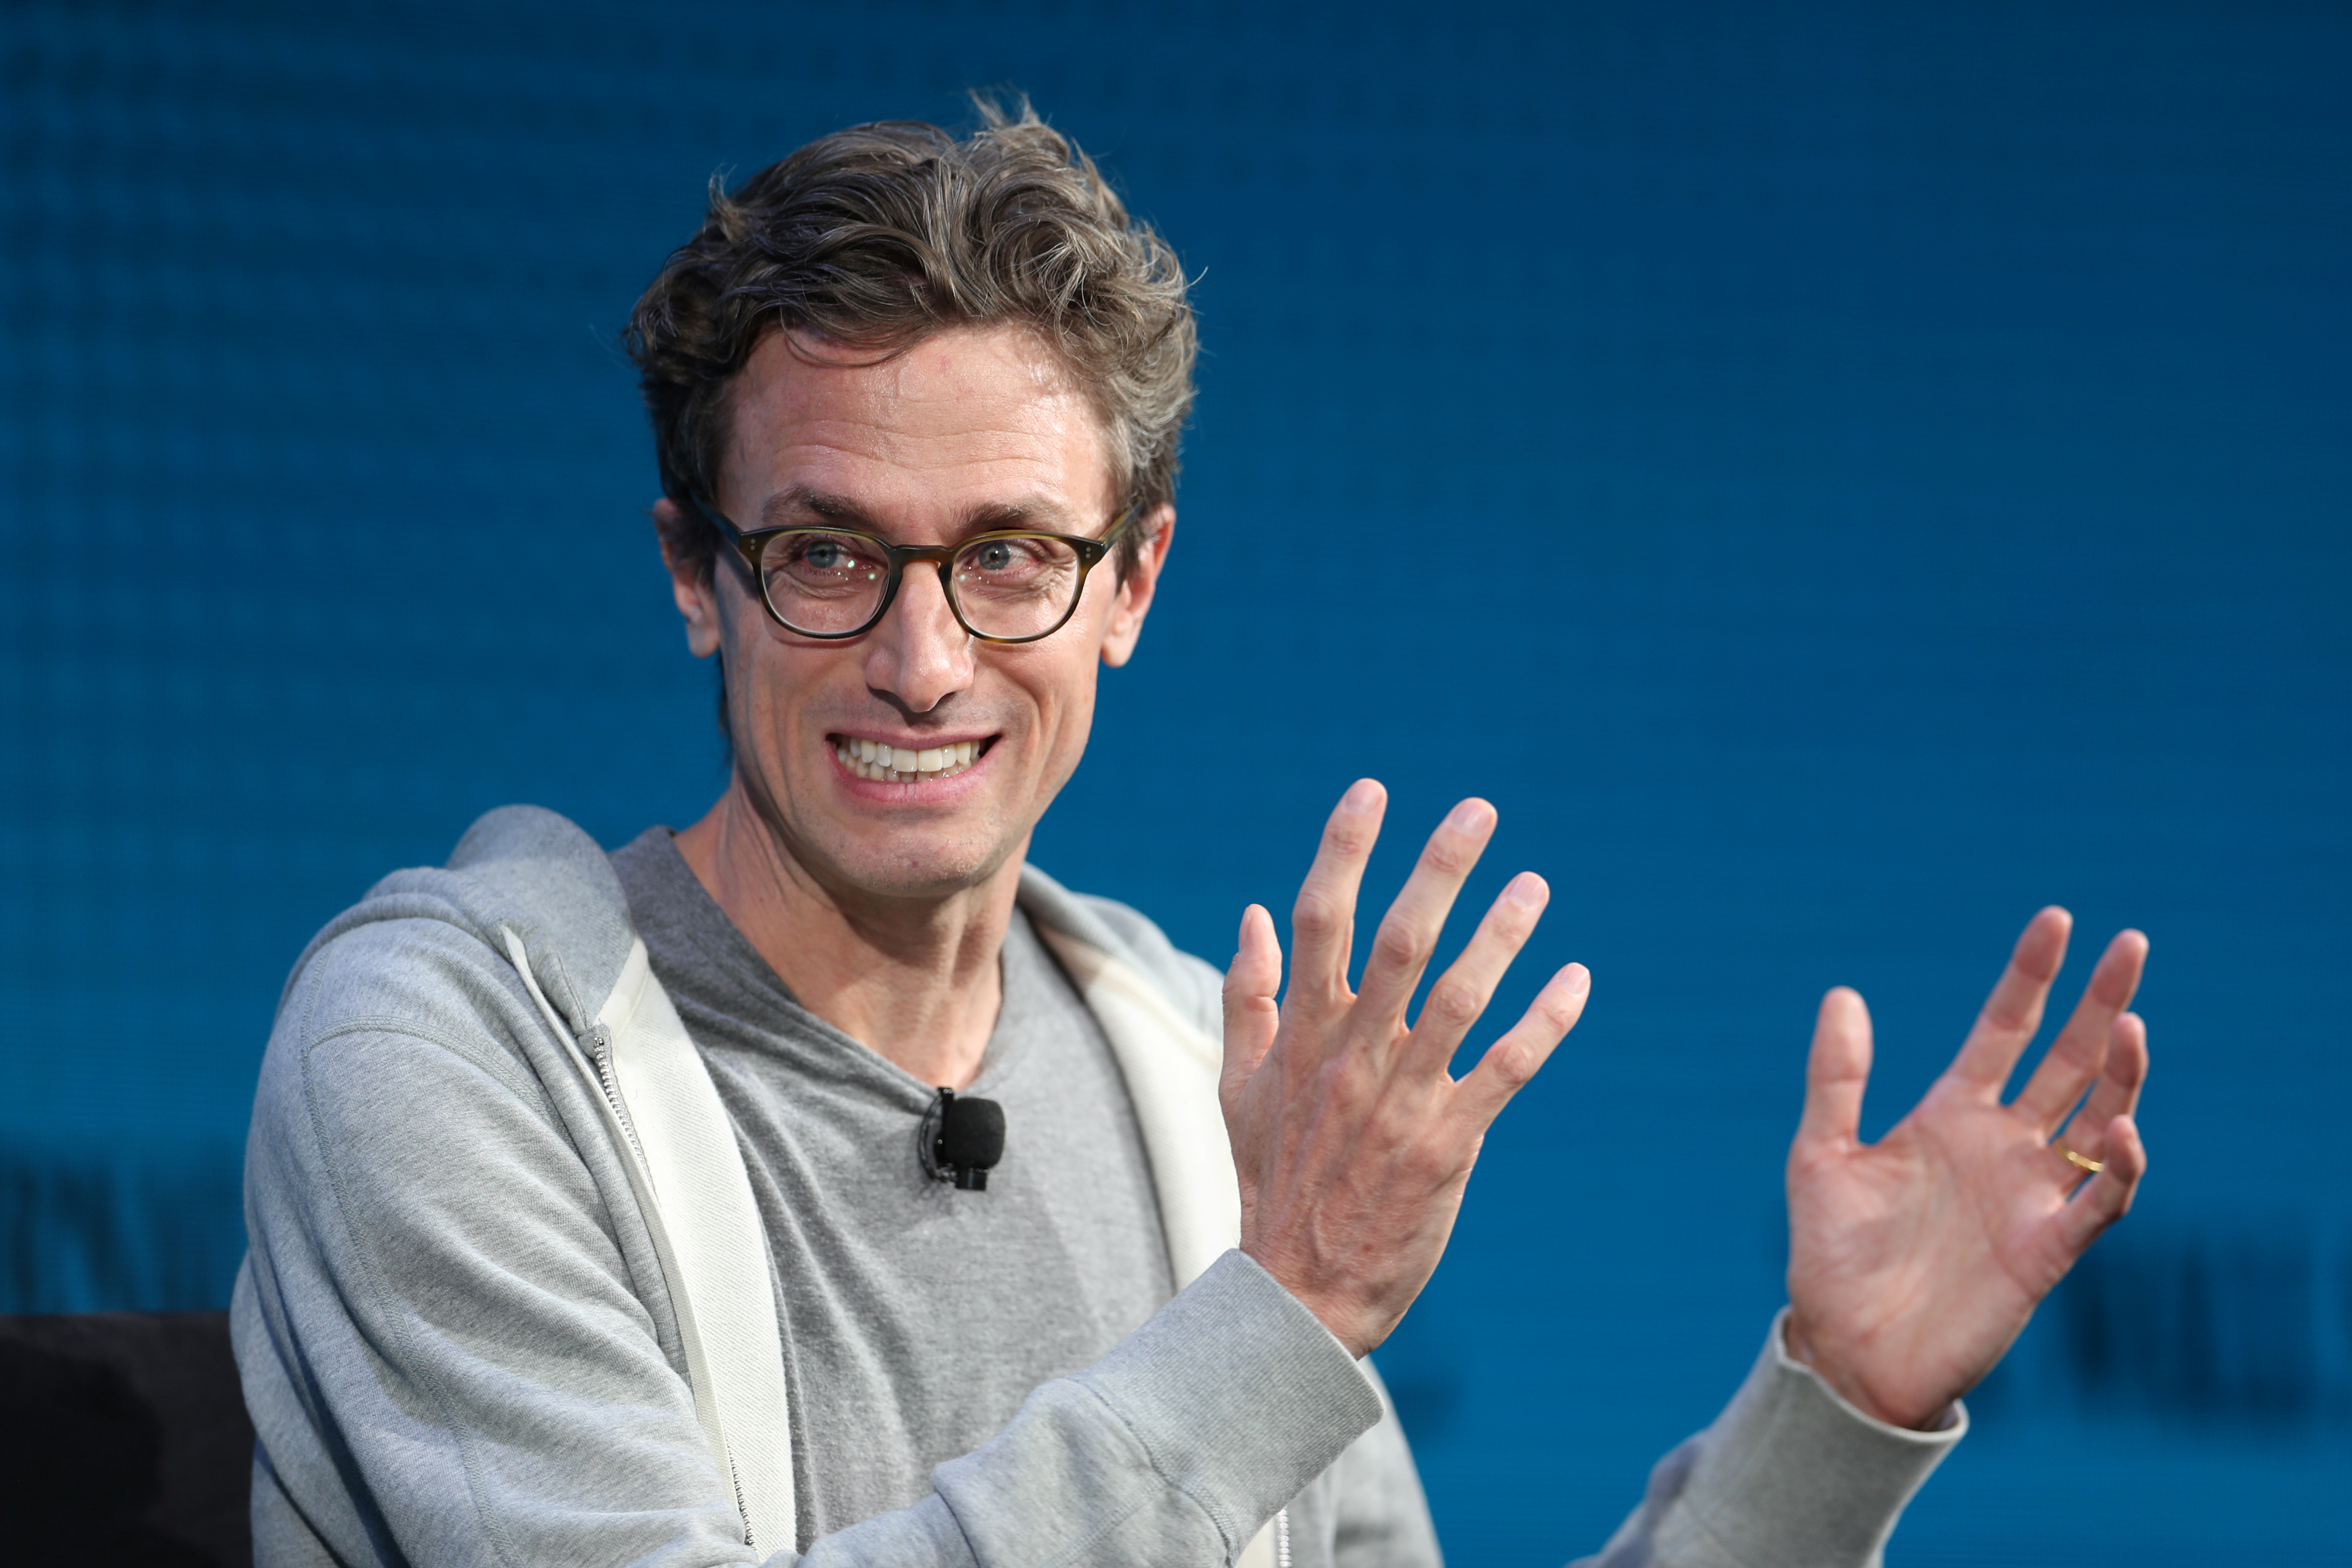 Jonah Peretti, Founder and CEO, Buzzfeed, speaks at the Wall Street Journal Digital Conference in Laguna Beach, California, U.S. October 18, 2017. REUTERS/Lucy Nicholson